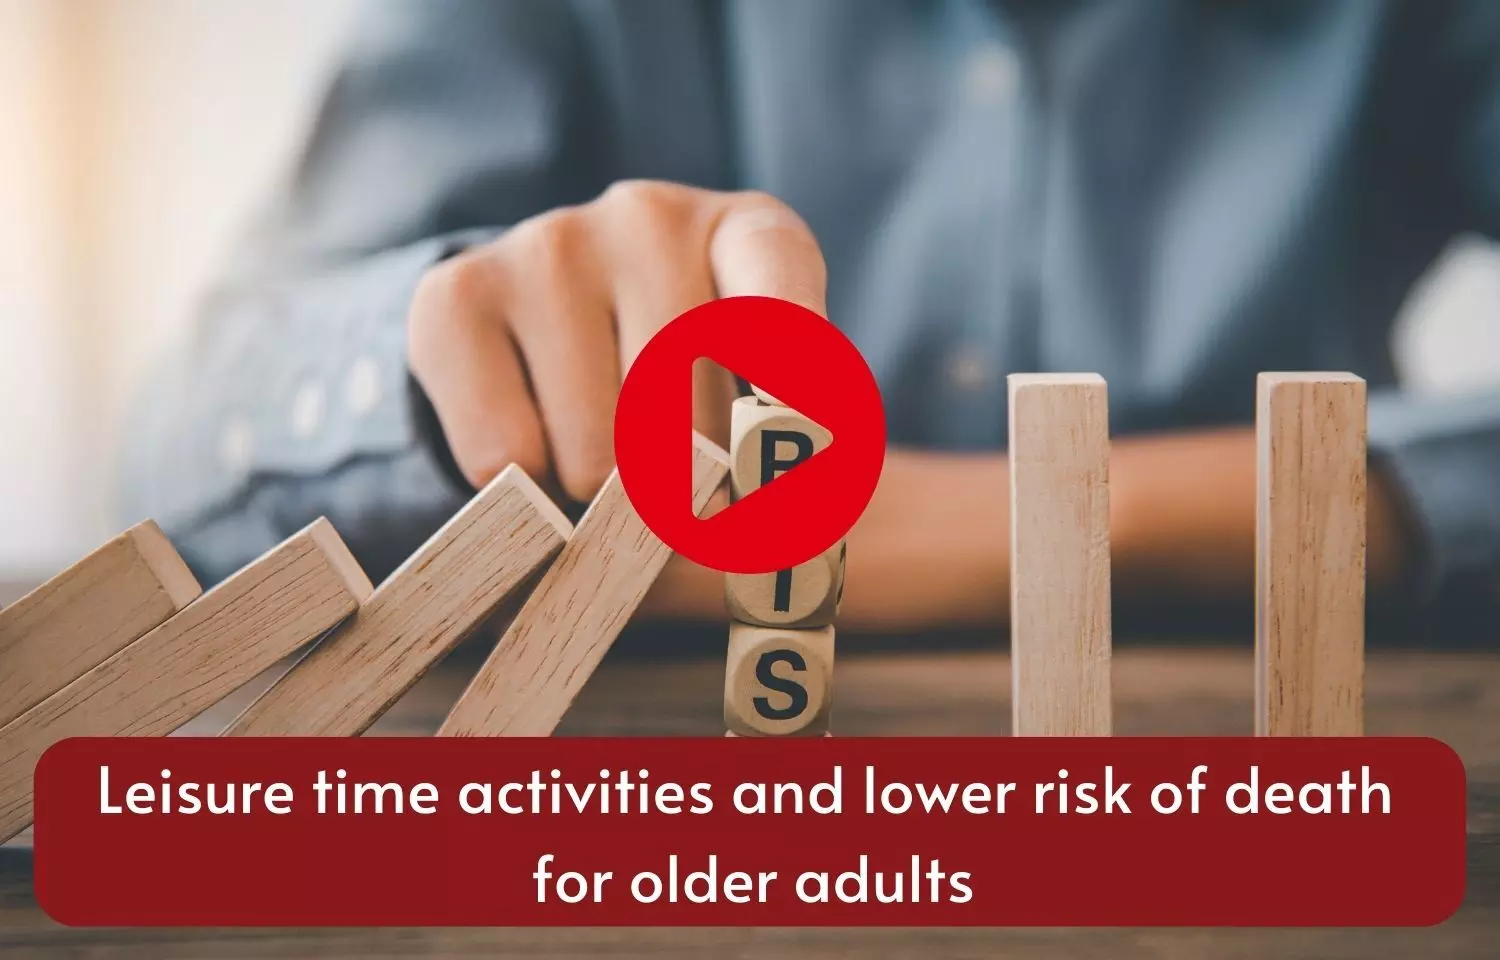 Leisure time activities and lower risk of death for older adults